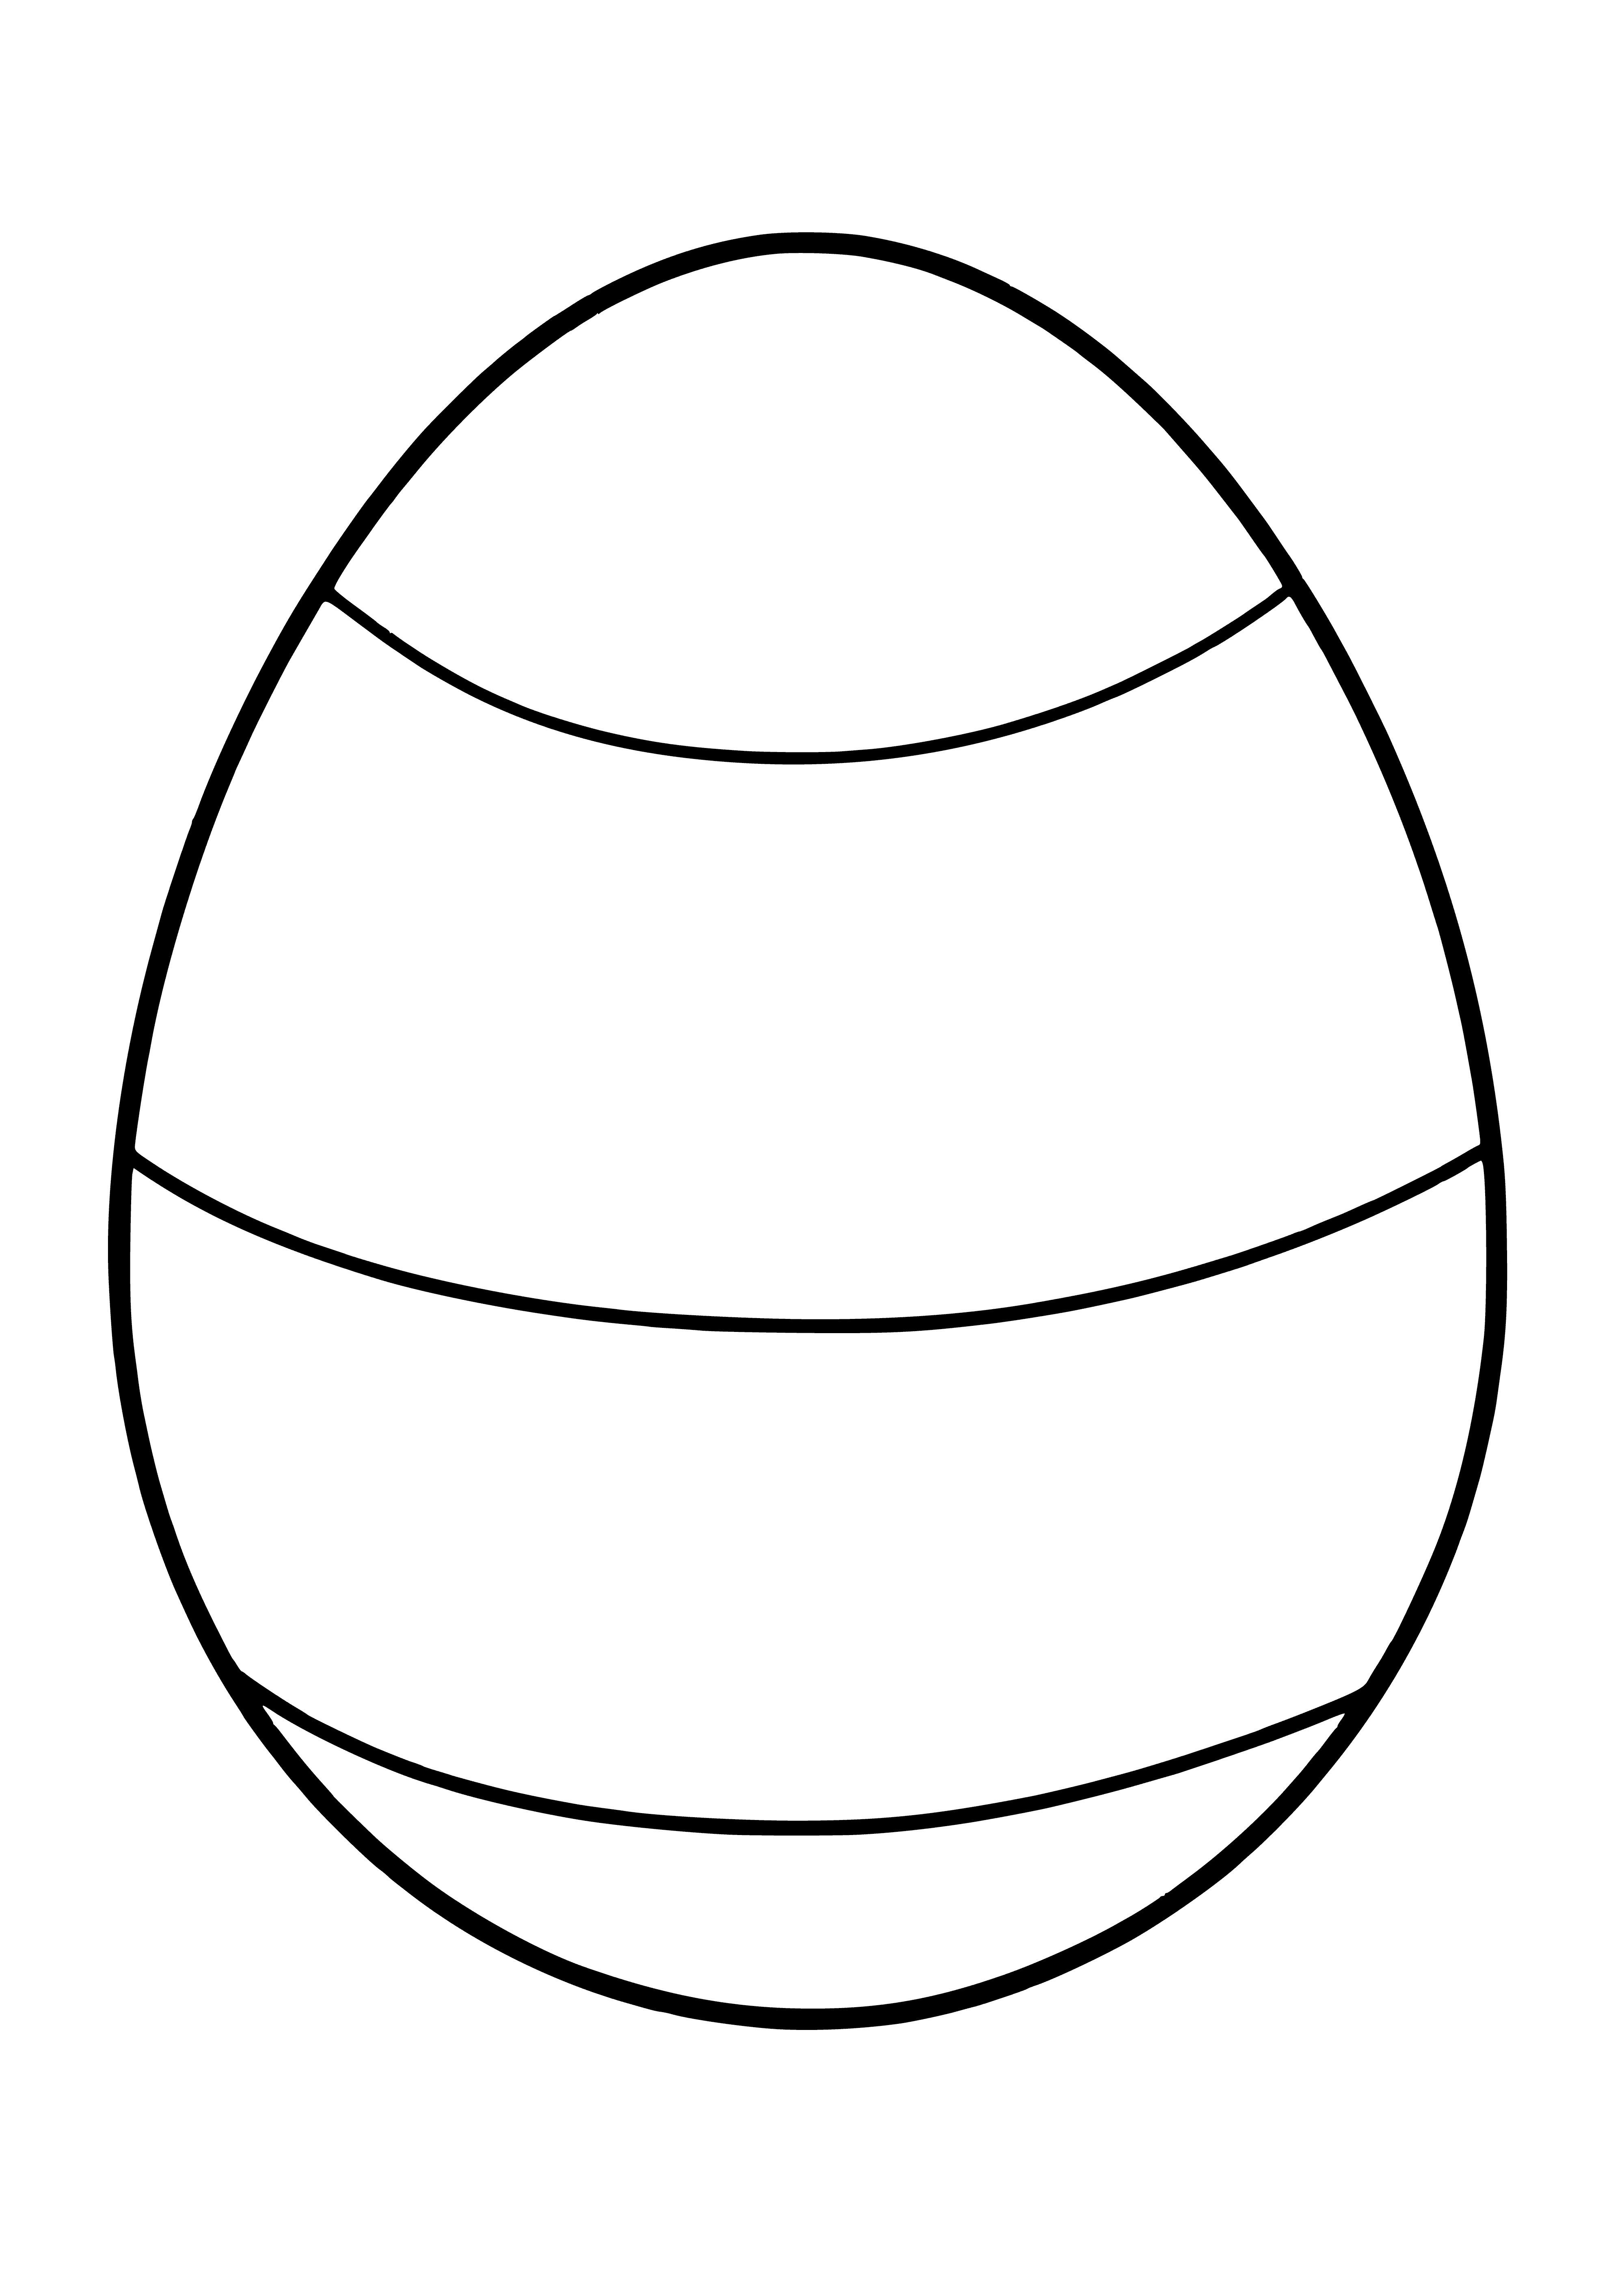 coloring page: #EasterEggs